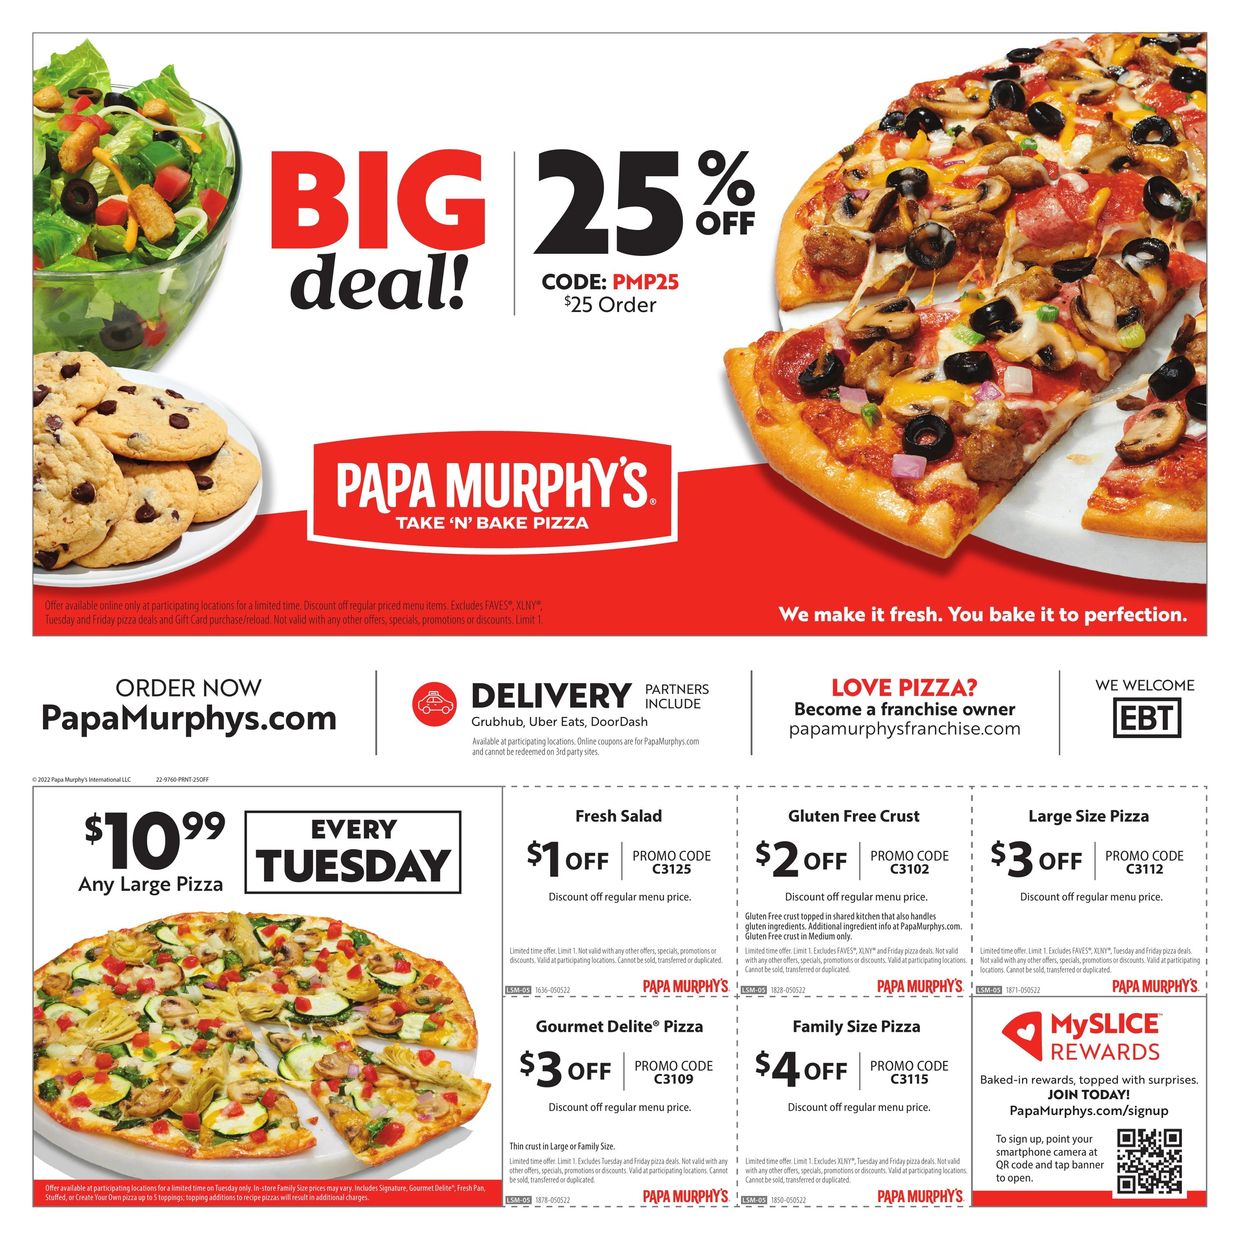 Papa Murphy's BIG deal! $25 OFF your order of $25 or more. Use code: PMP25
Phoenix area only